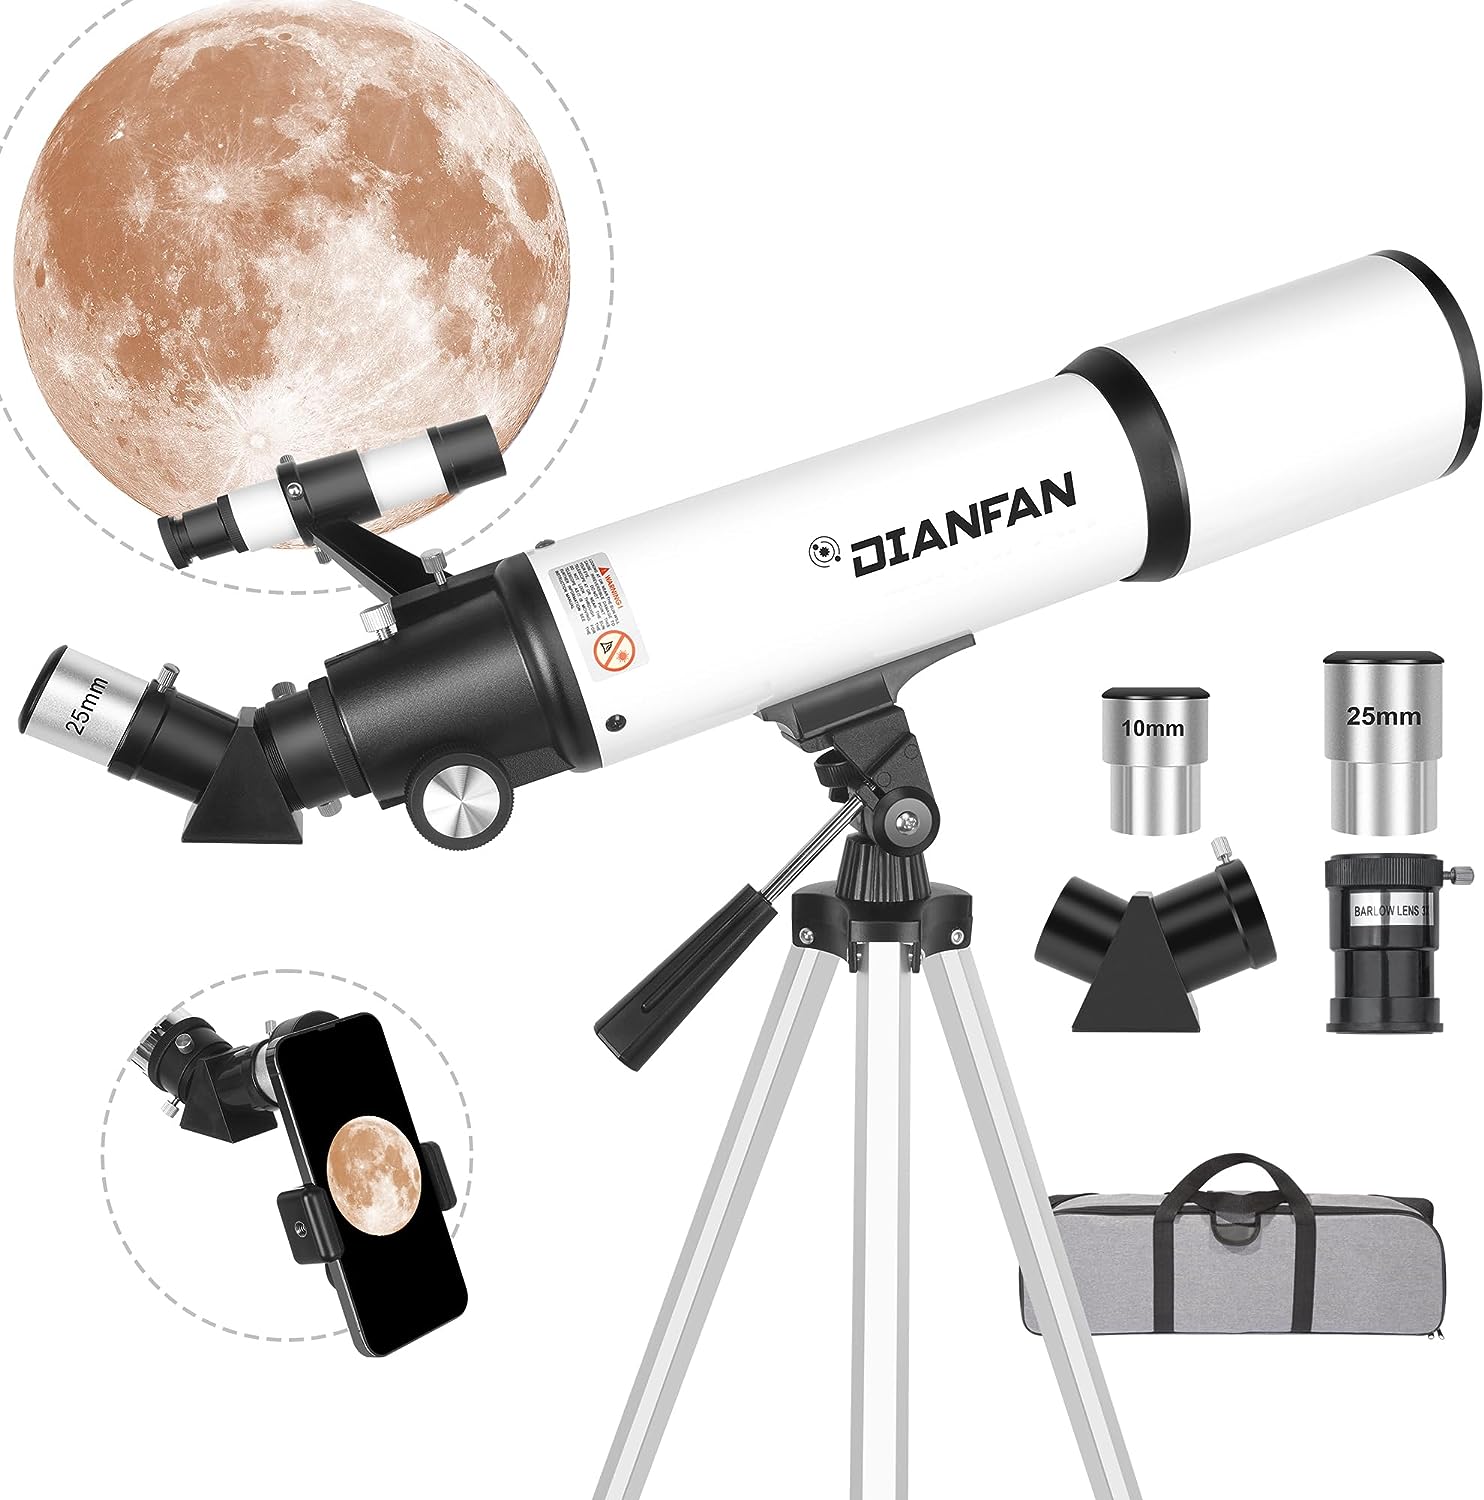 Dianfan Telescope,80mm Aperture 600mm Telescopes for Adults Astronomy,Fully Mult-Coated High Powered Refracting Telescope for Kids Beginners,Professional Telescopes with Tripod,Phone Adapter and Bag